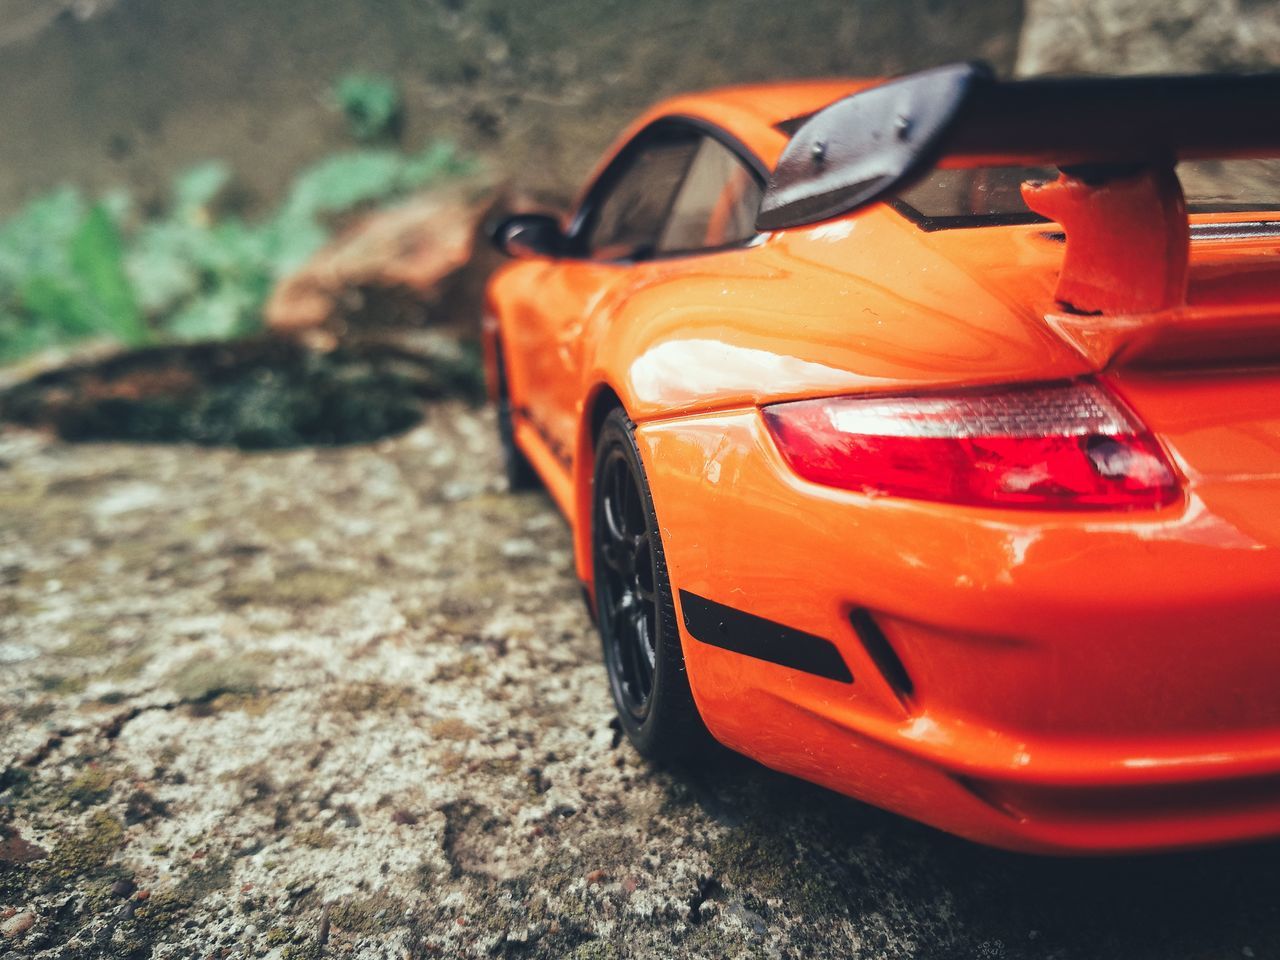 mode of transportation, orange color, car, motor vehicle, land vehicle, transportation, close-up, focus on foreground, day, no people, stationary, toy car, red, toy, outdoors, plastic, high angle view, city, selective focus, travel